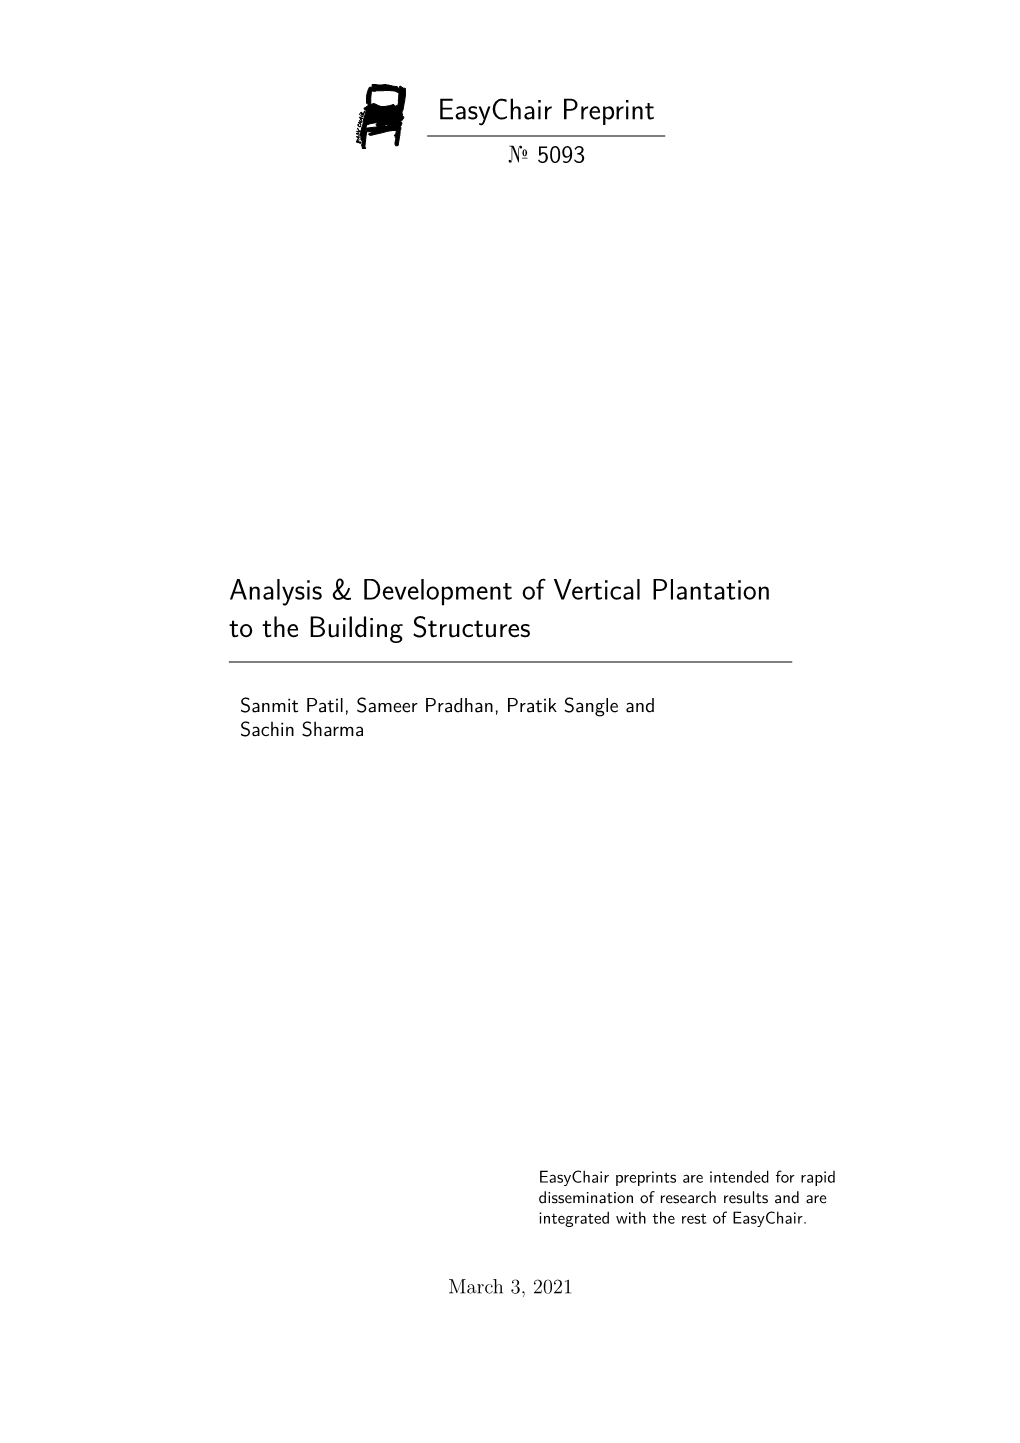 Analysis & Development of Vertical Plantation to the Building Structures